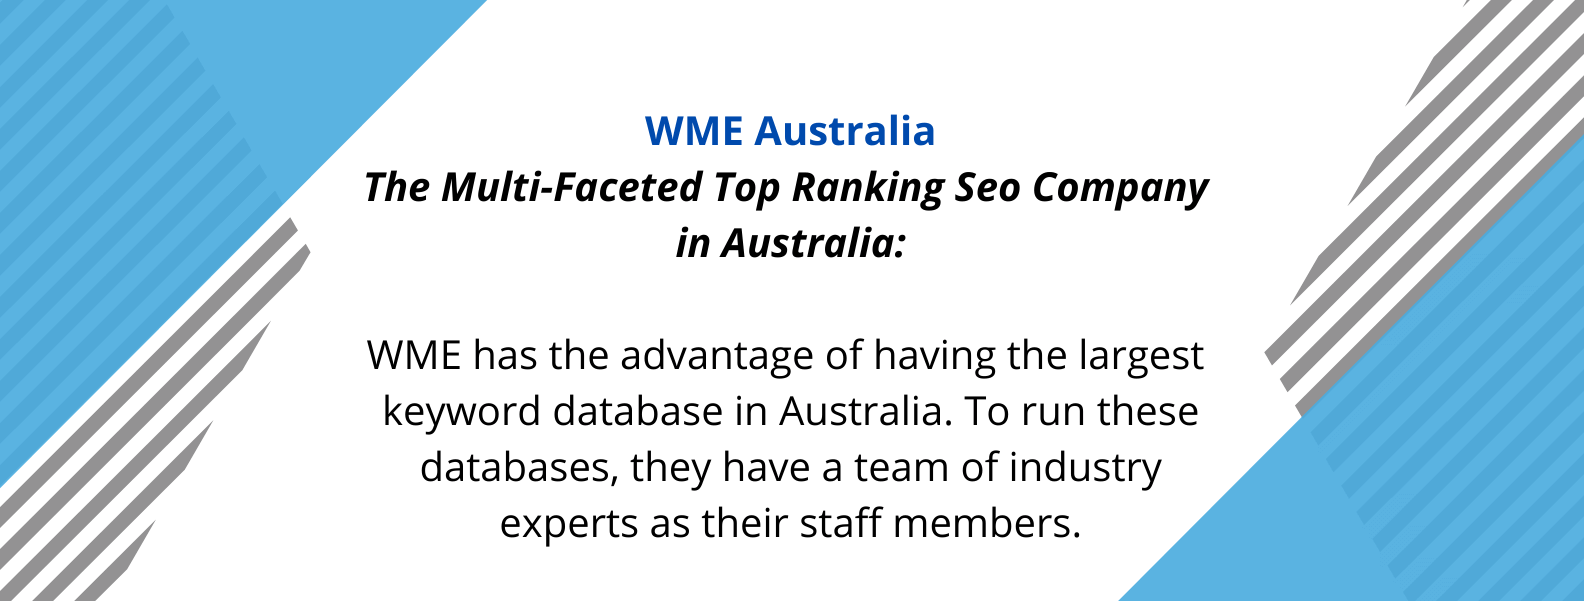 Unique Selling proposition of WME, one of the best SEO agencies of Australia.